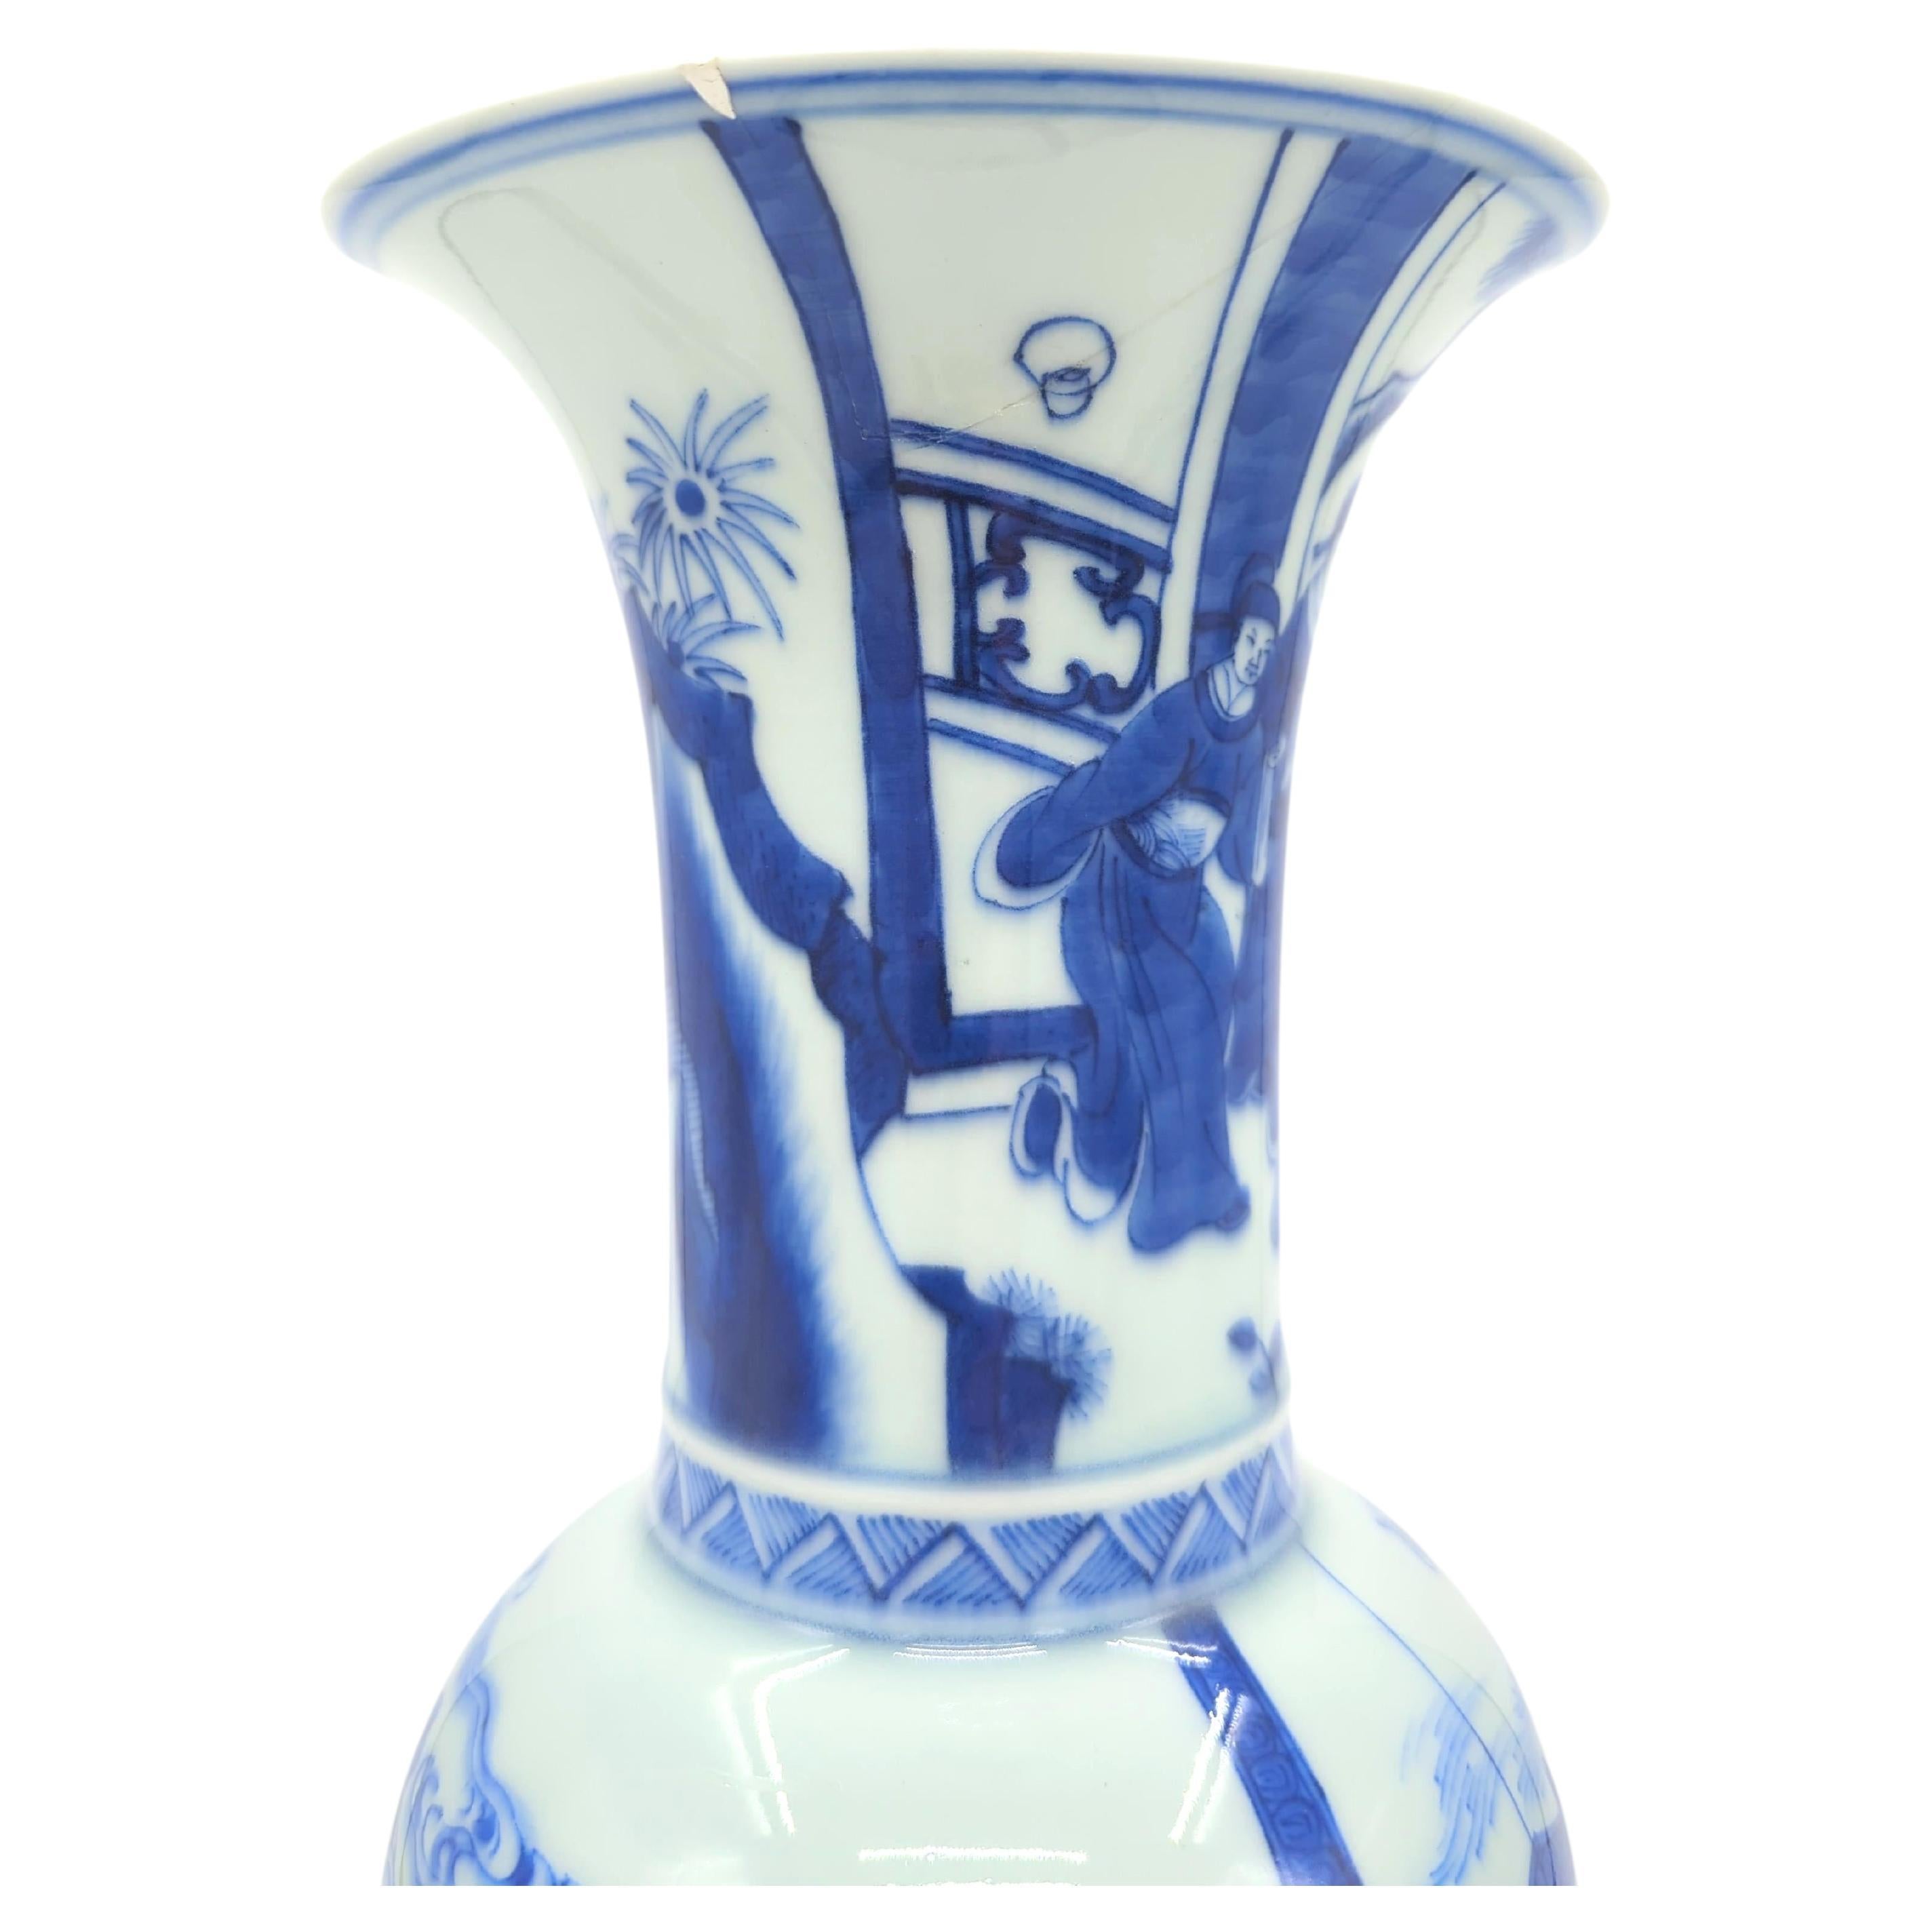 This late Qing to early Republic of China period Gu vase, stands as a testament to the enduring artistry of Chinese blue and white porcelain, in the revered Kangxi style. The vase is masterfully painted with figures in traditional Qing attire, who